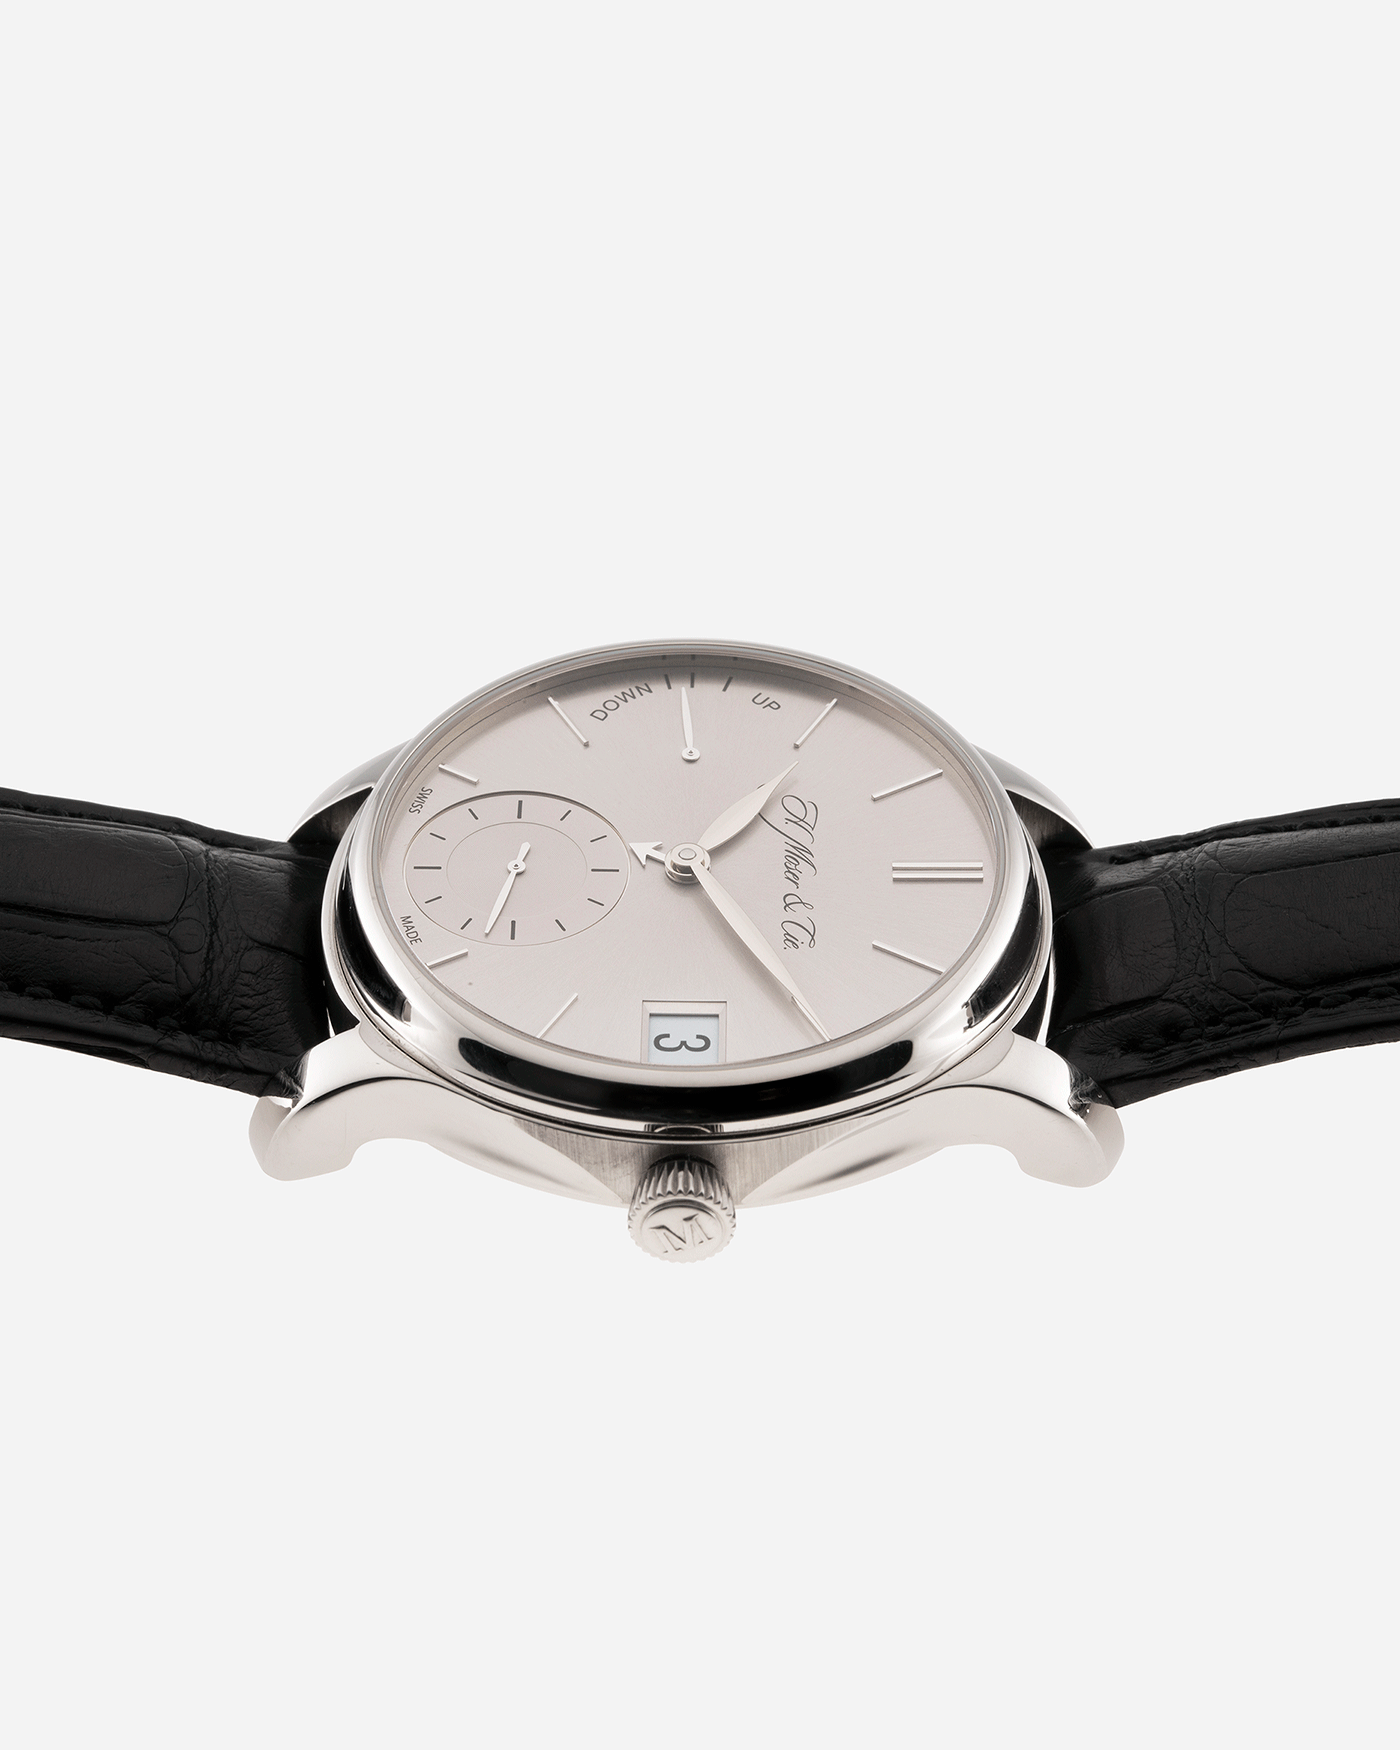 Brand: H.Moser & Cie Year: 2013 Model: Endeavour Perpetual Reference Number: 341.501-002 Material: 18k White Gold Movement: Manually wound Caliber HMC 341.501 Case Diameter: 40.8mm Bracelet/Strap: H. Moser & Cie Black Alligator Leather Strap with matching 18k White Gold Tang Buckle